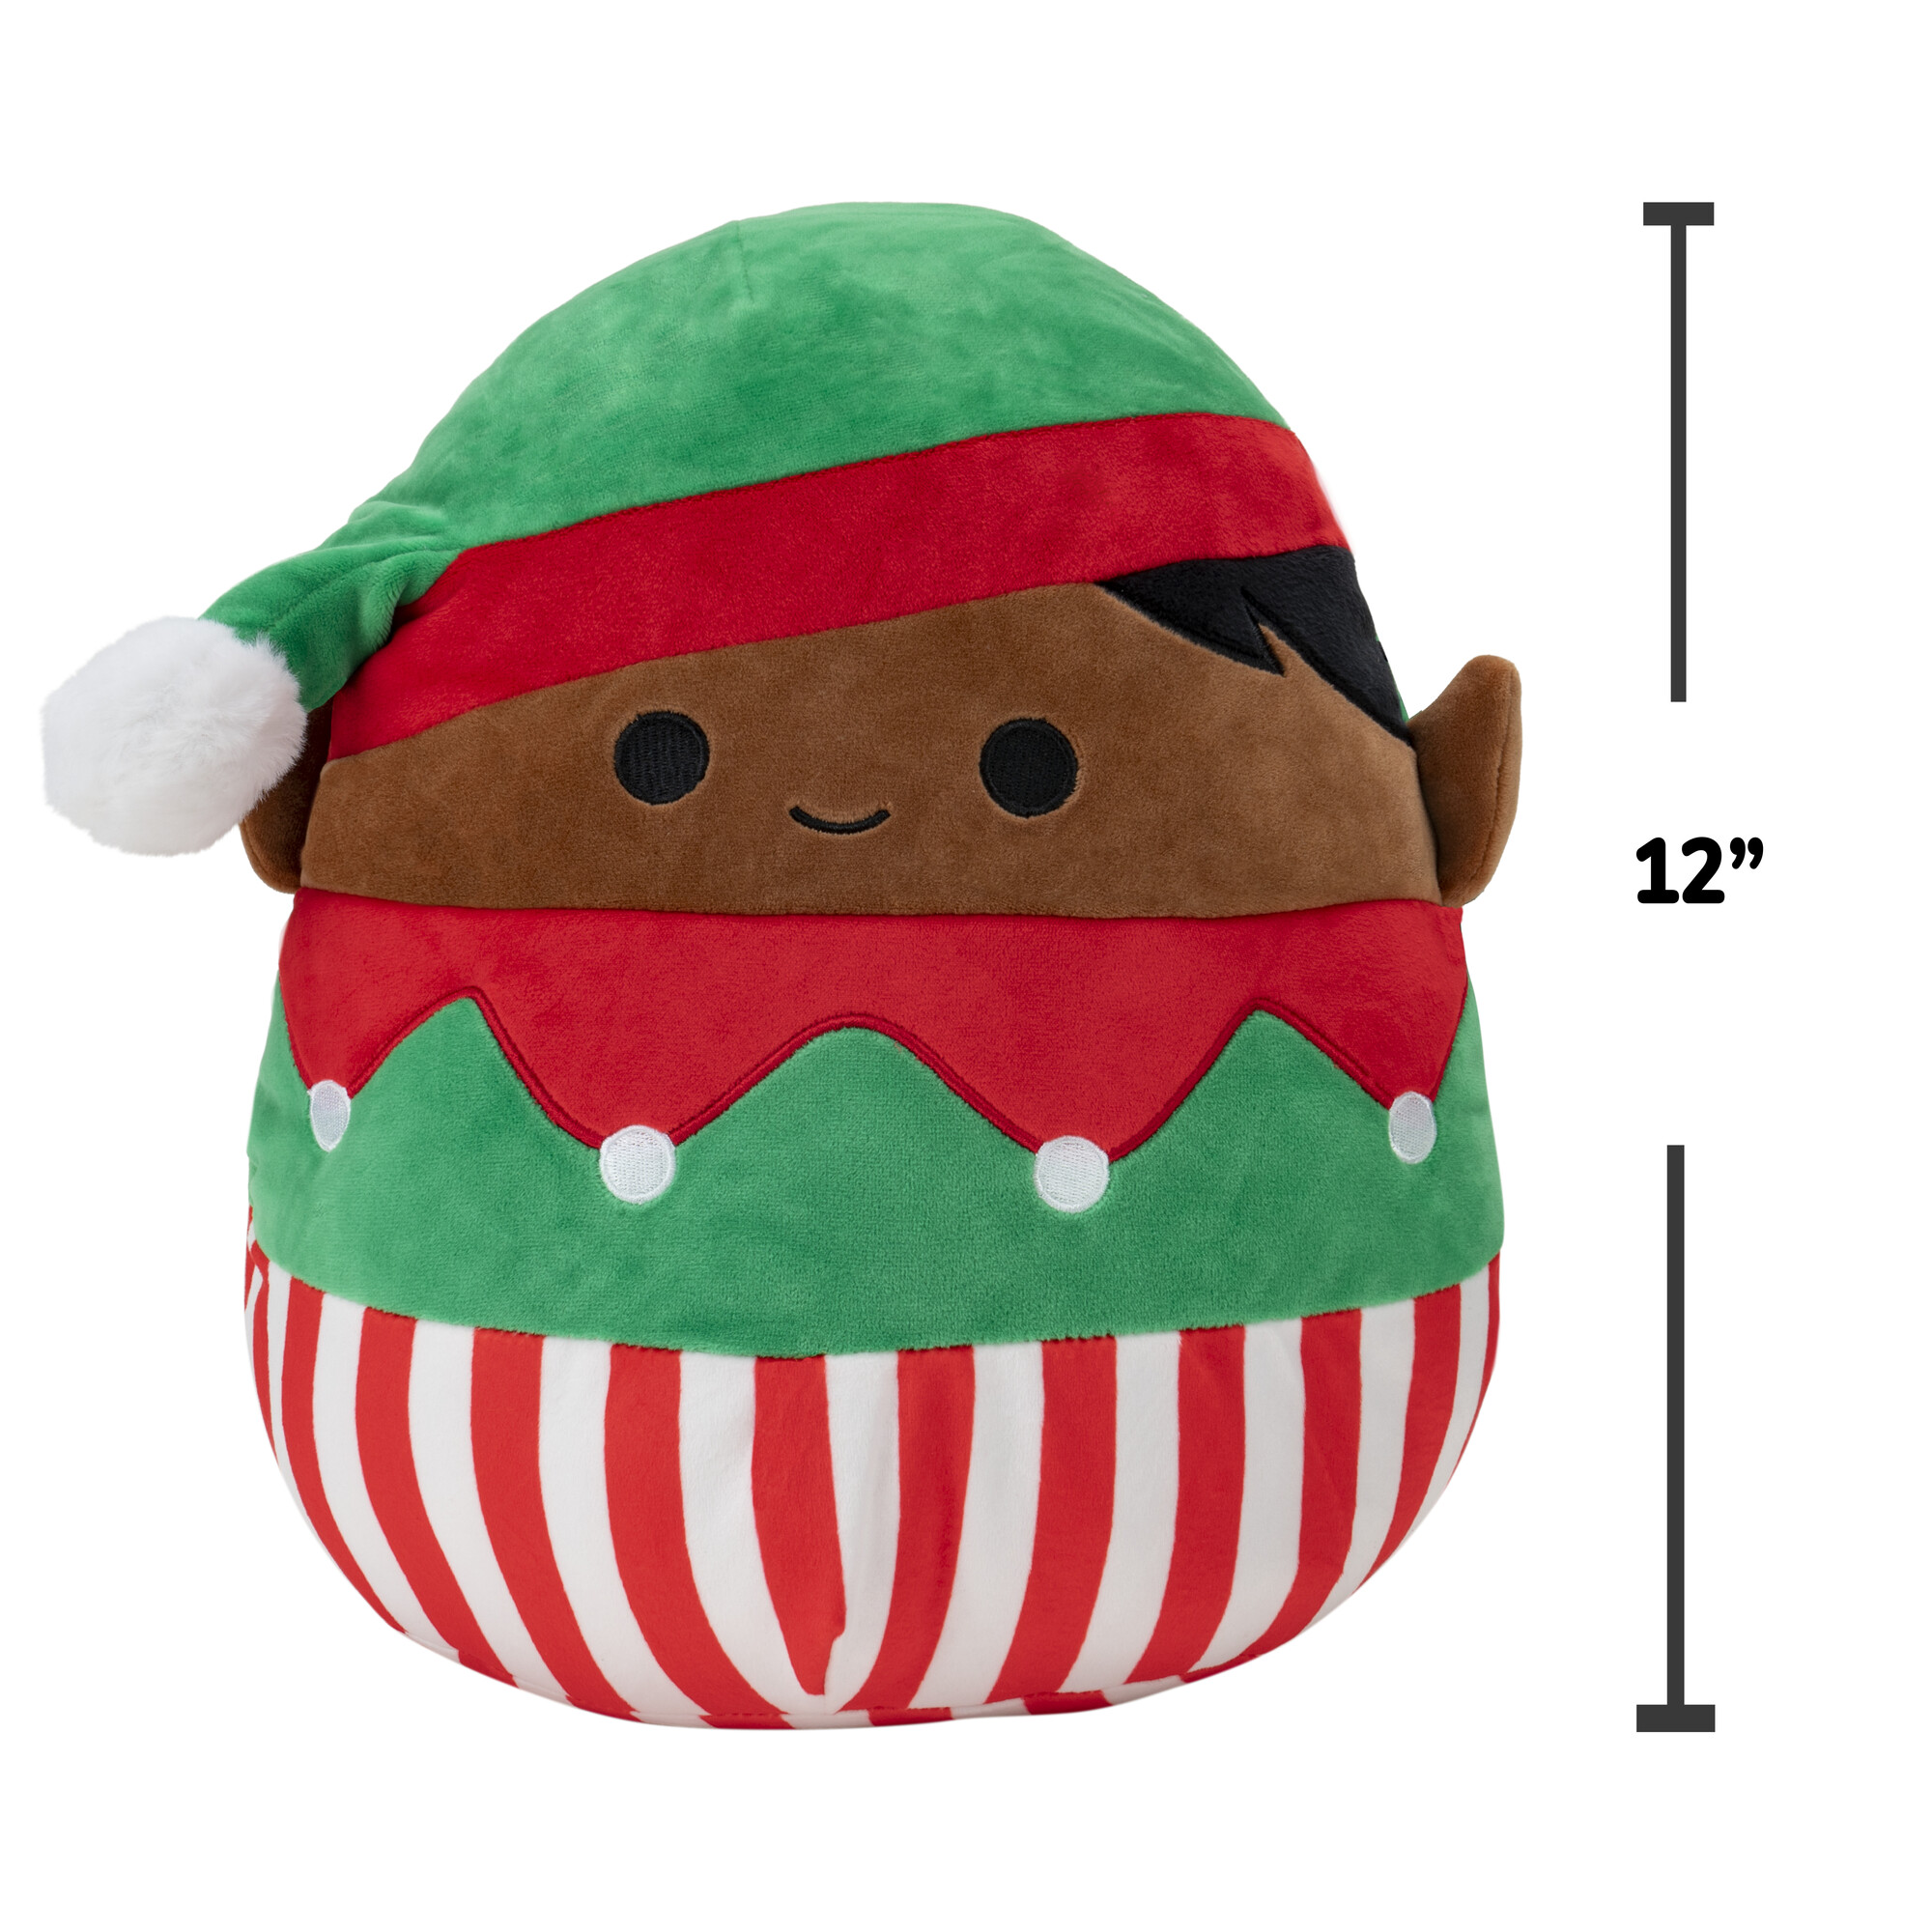 Squishmallows 12 inch Ezrah the Red and Green Elf Boy - Child's Ultra Soft Stuffed Plush Toy - image 2 of 7